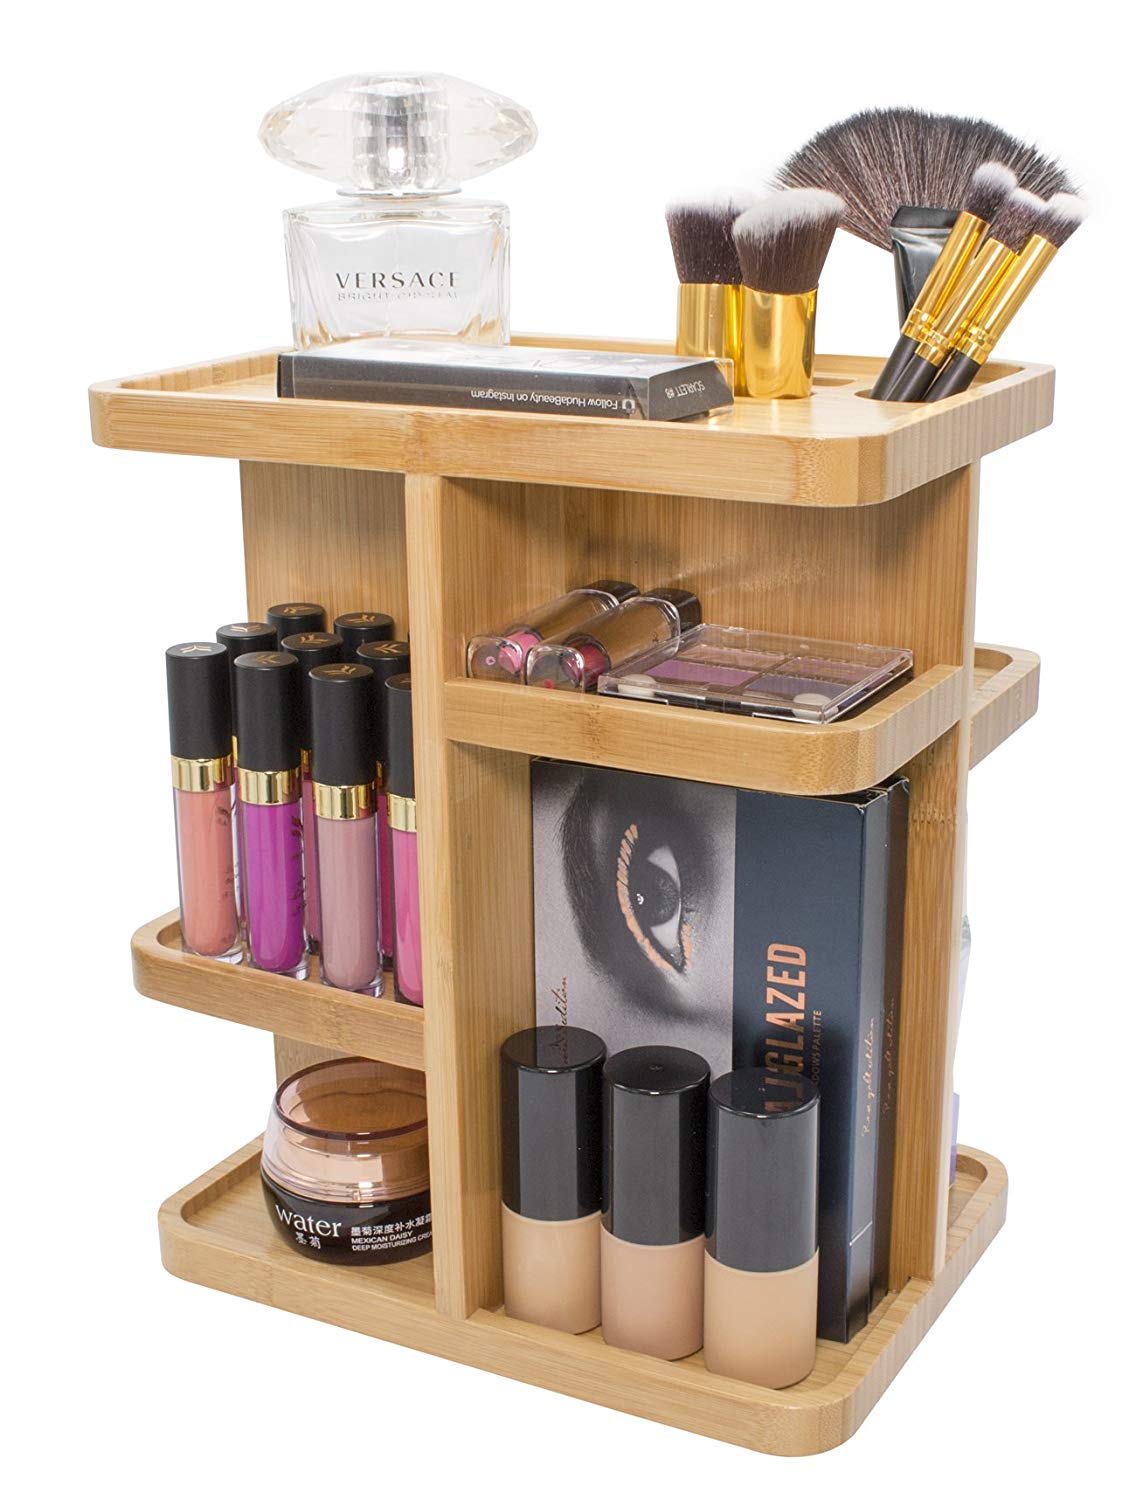 Sorbus 360&#xB0; Bamboo Rotating Makeup Organizer - Multi-Function Storage Carousel stores Cosmetics, Skin Care, and more - Stylish and functional